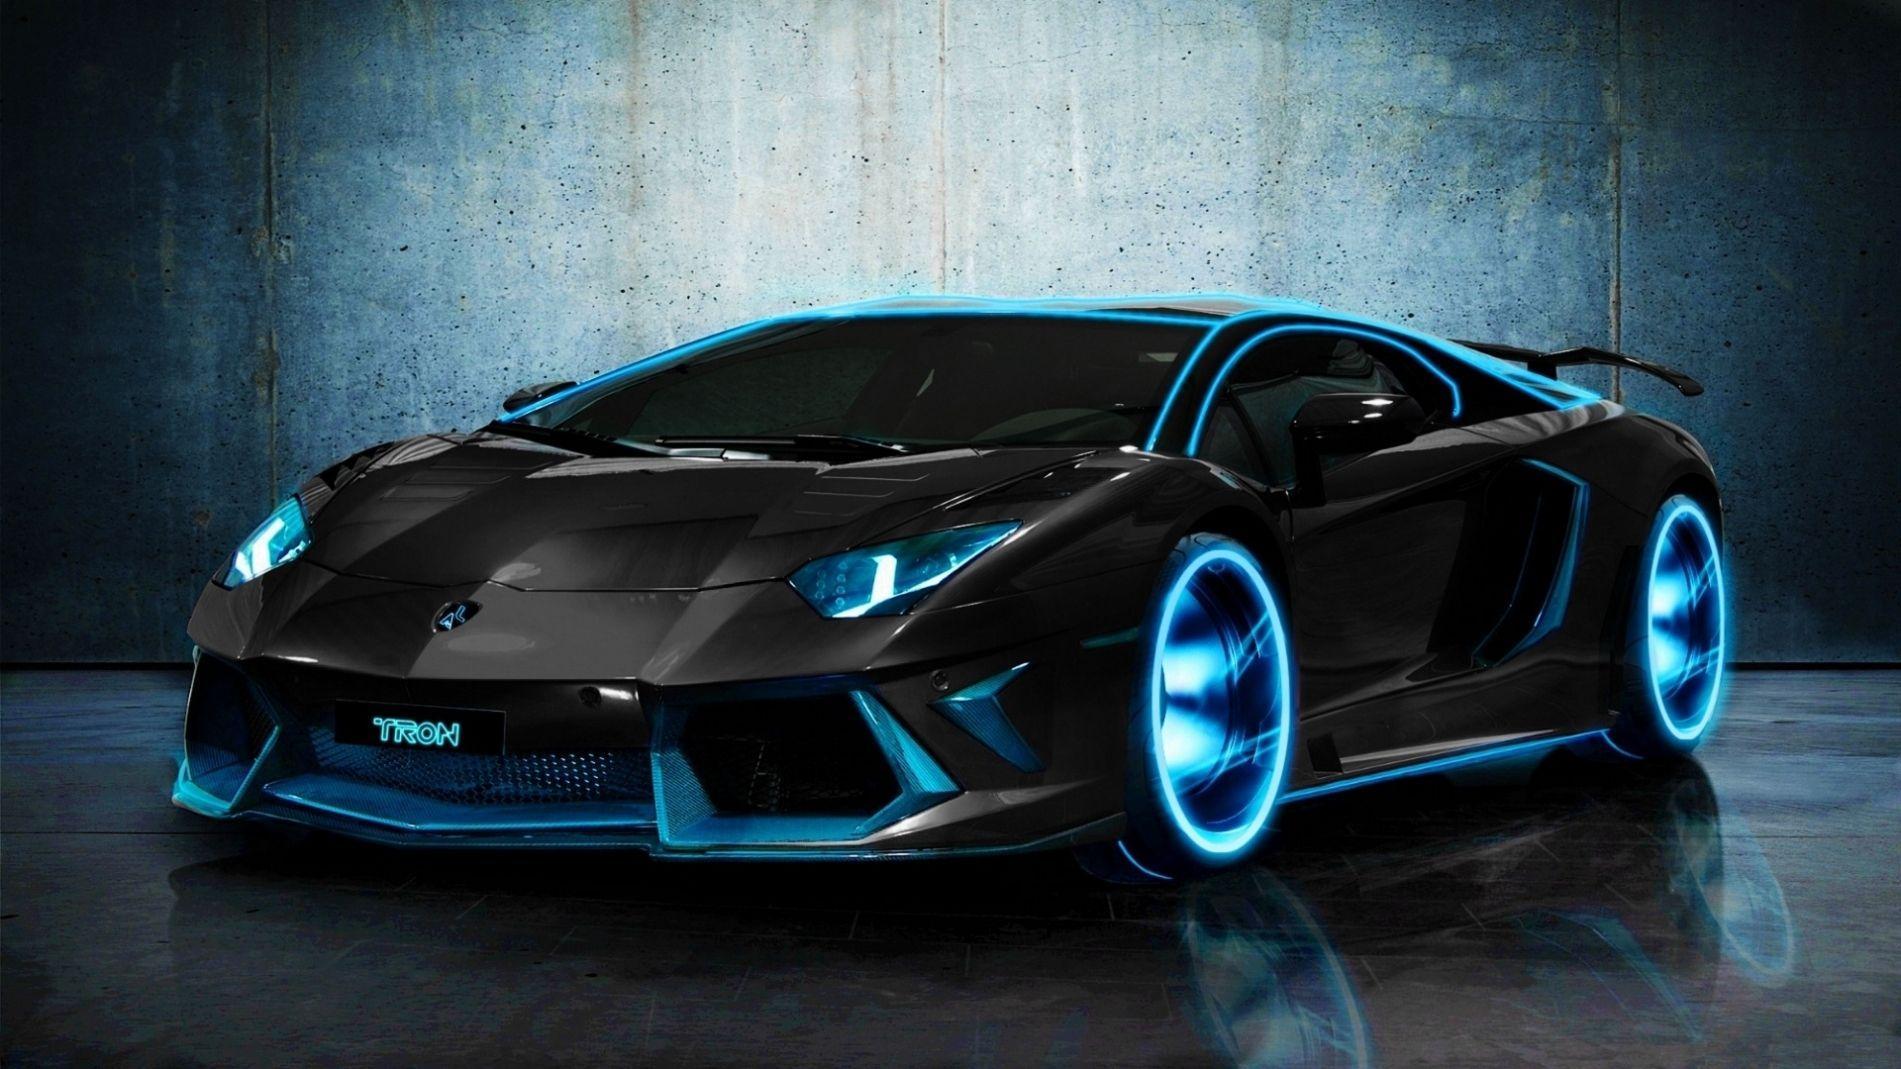 New Download Car Wallpaper Exotic & Awesome Car Wallpaper